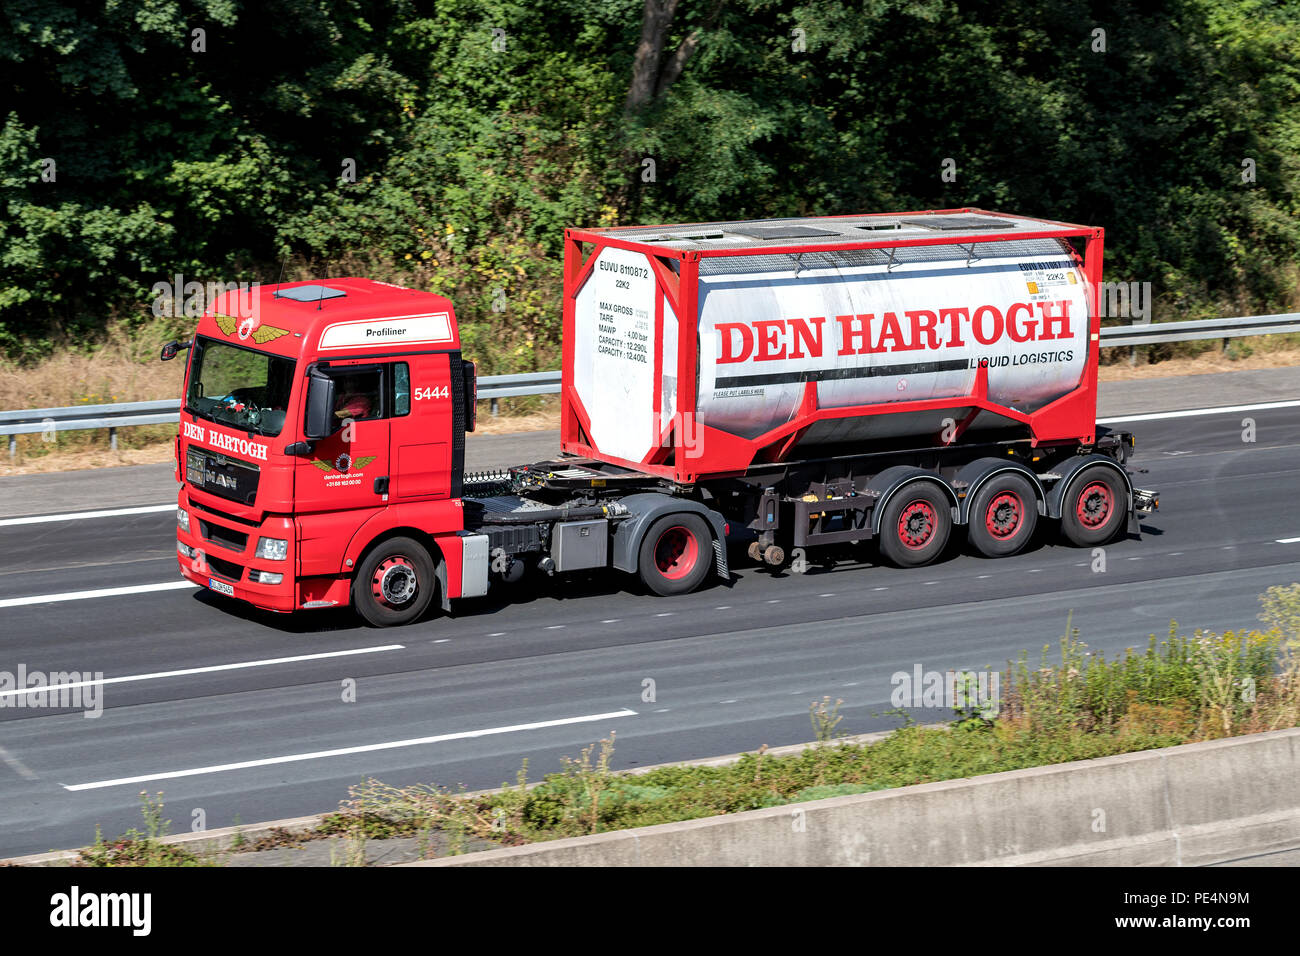 Den Hartogh truck on motorway. Den Hartogh is family-owned organisation that was established in 1920 and is headquartered in Rotterdam, Netherlands. Stock Photo